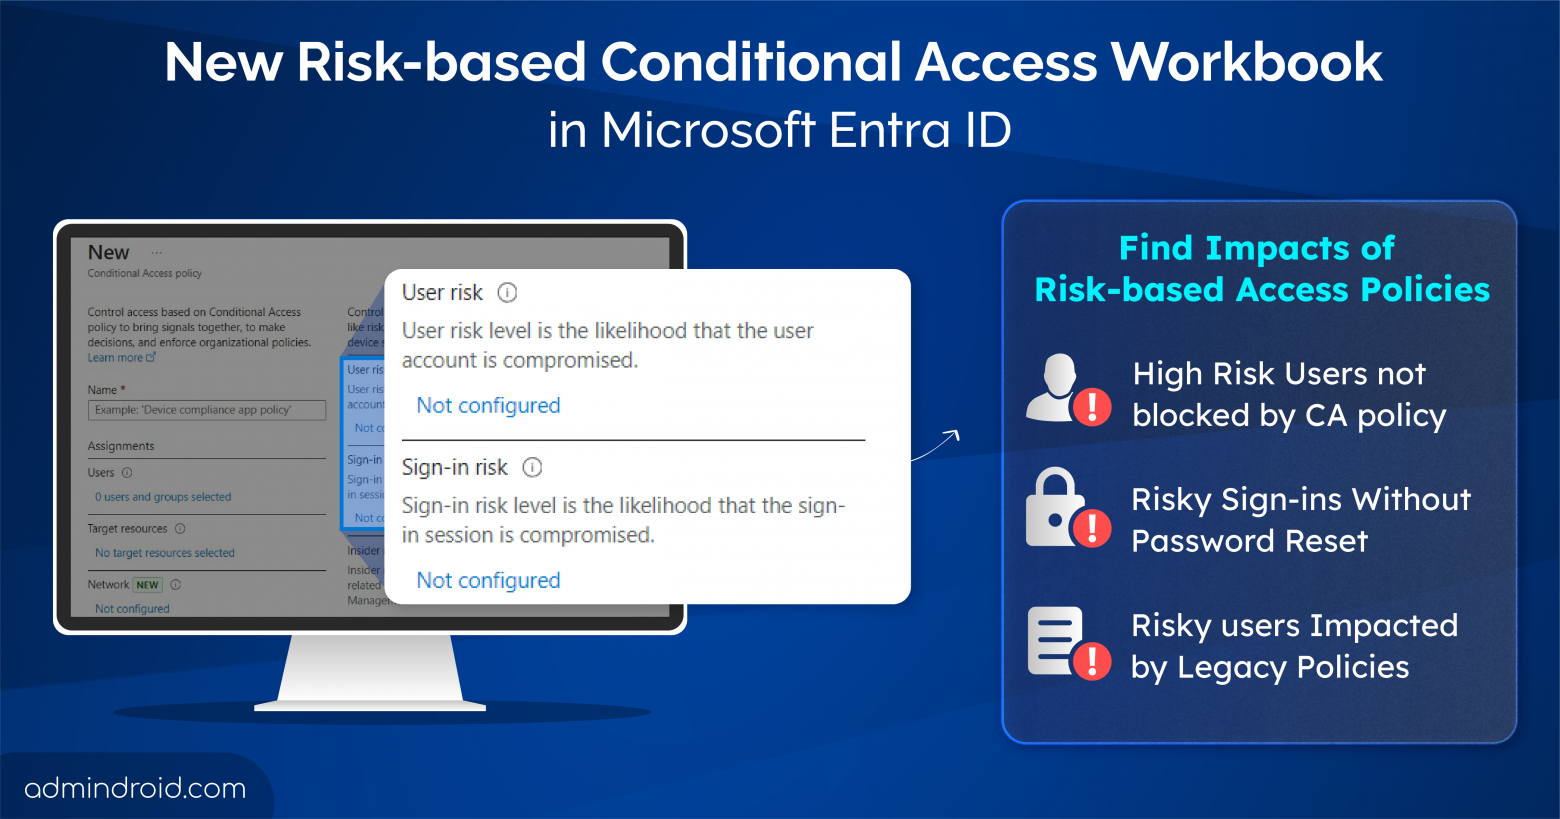 New Risk-based Conditional Access Workbook